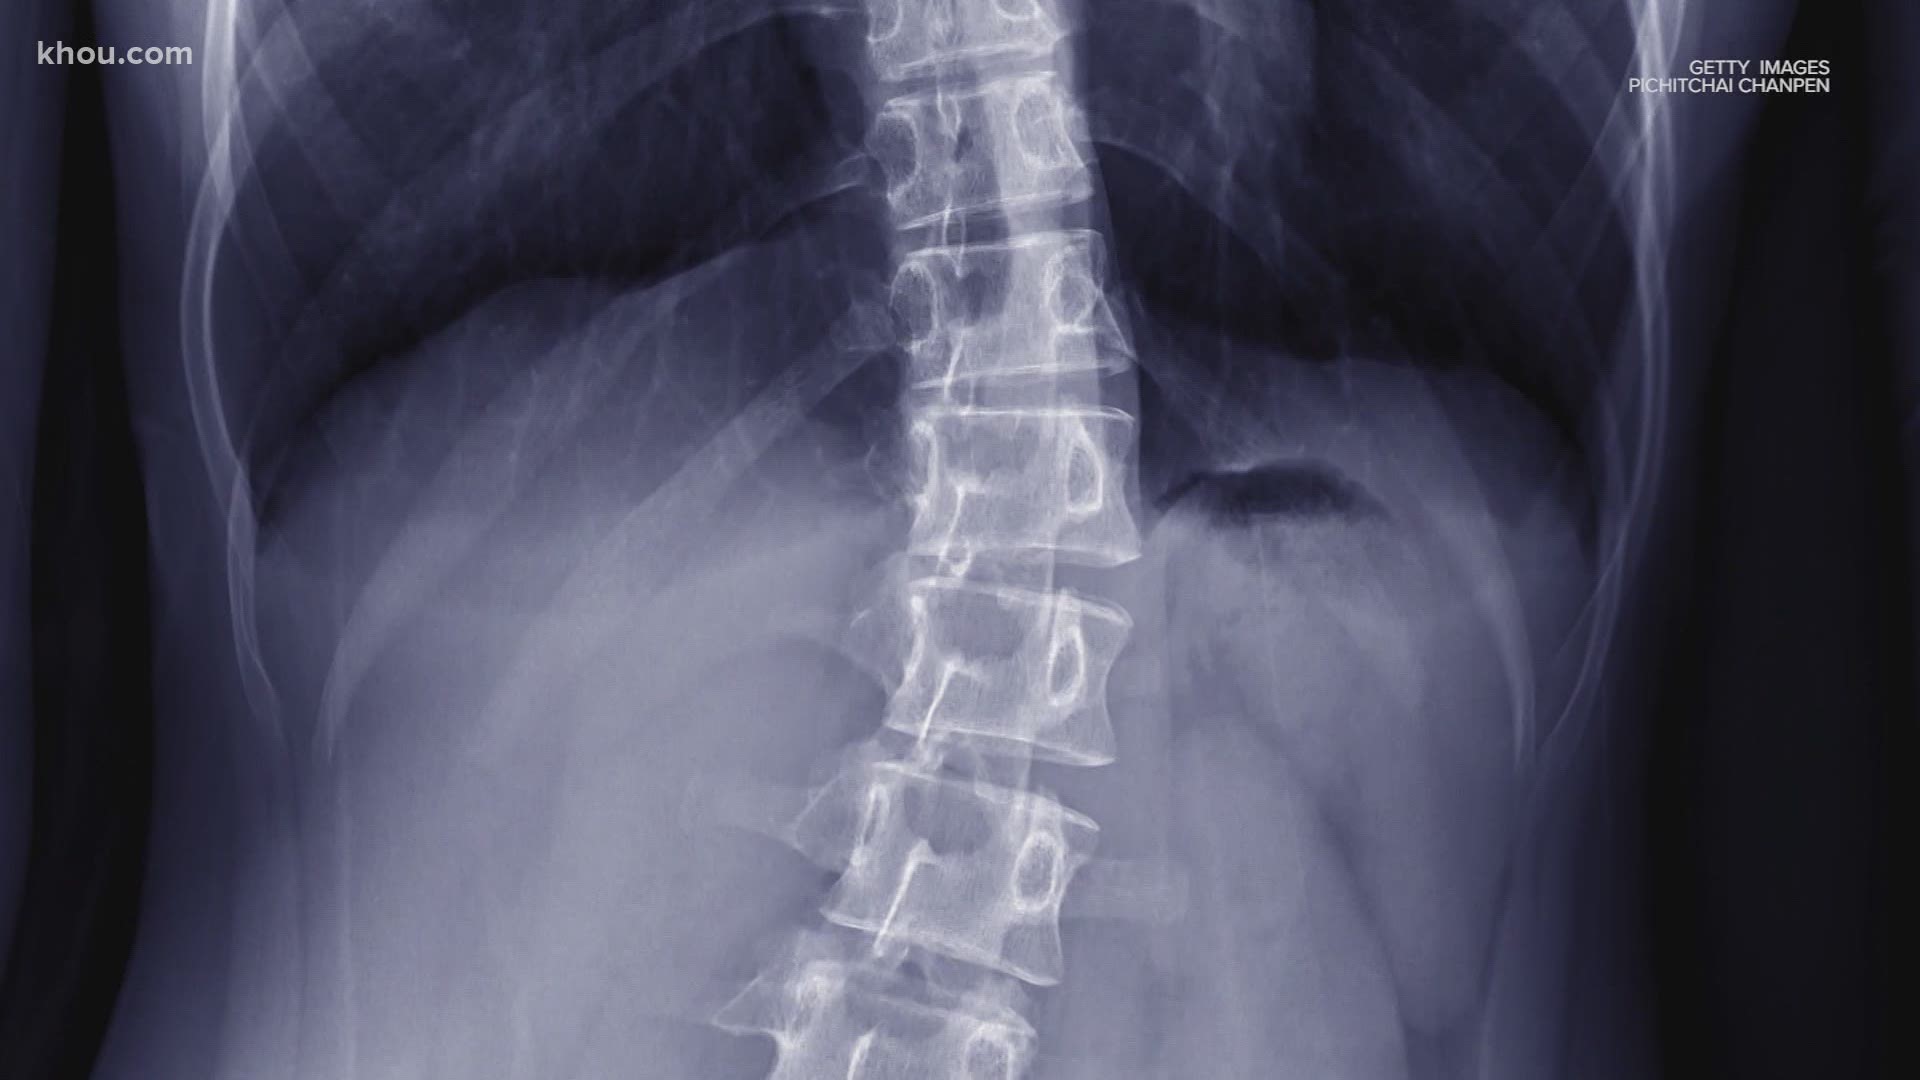 Scoliosis affects 2 to 3 percent of the population, but it's typically evident in children 10-15. Doctors with UT Physicians have a unique range of care for patients